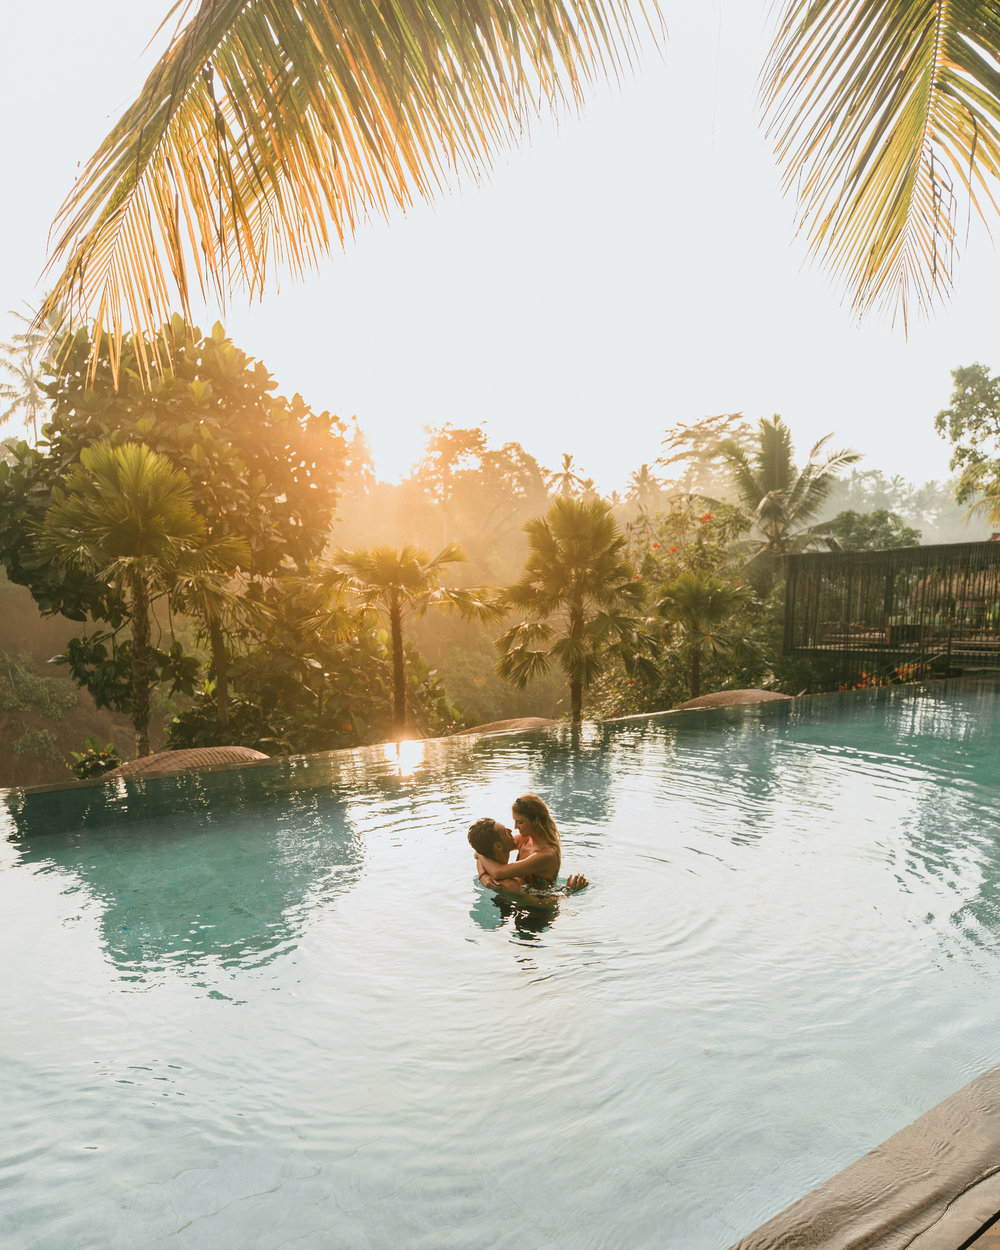 where to stay in bali indonesia travel guide chapung sebali